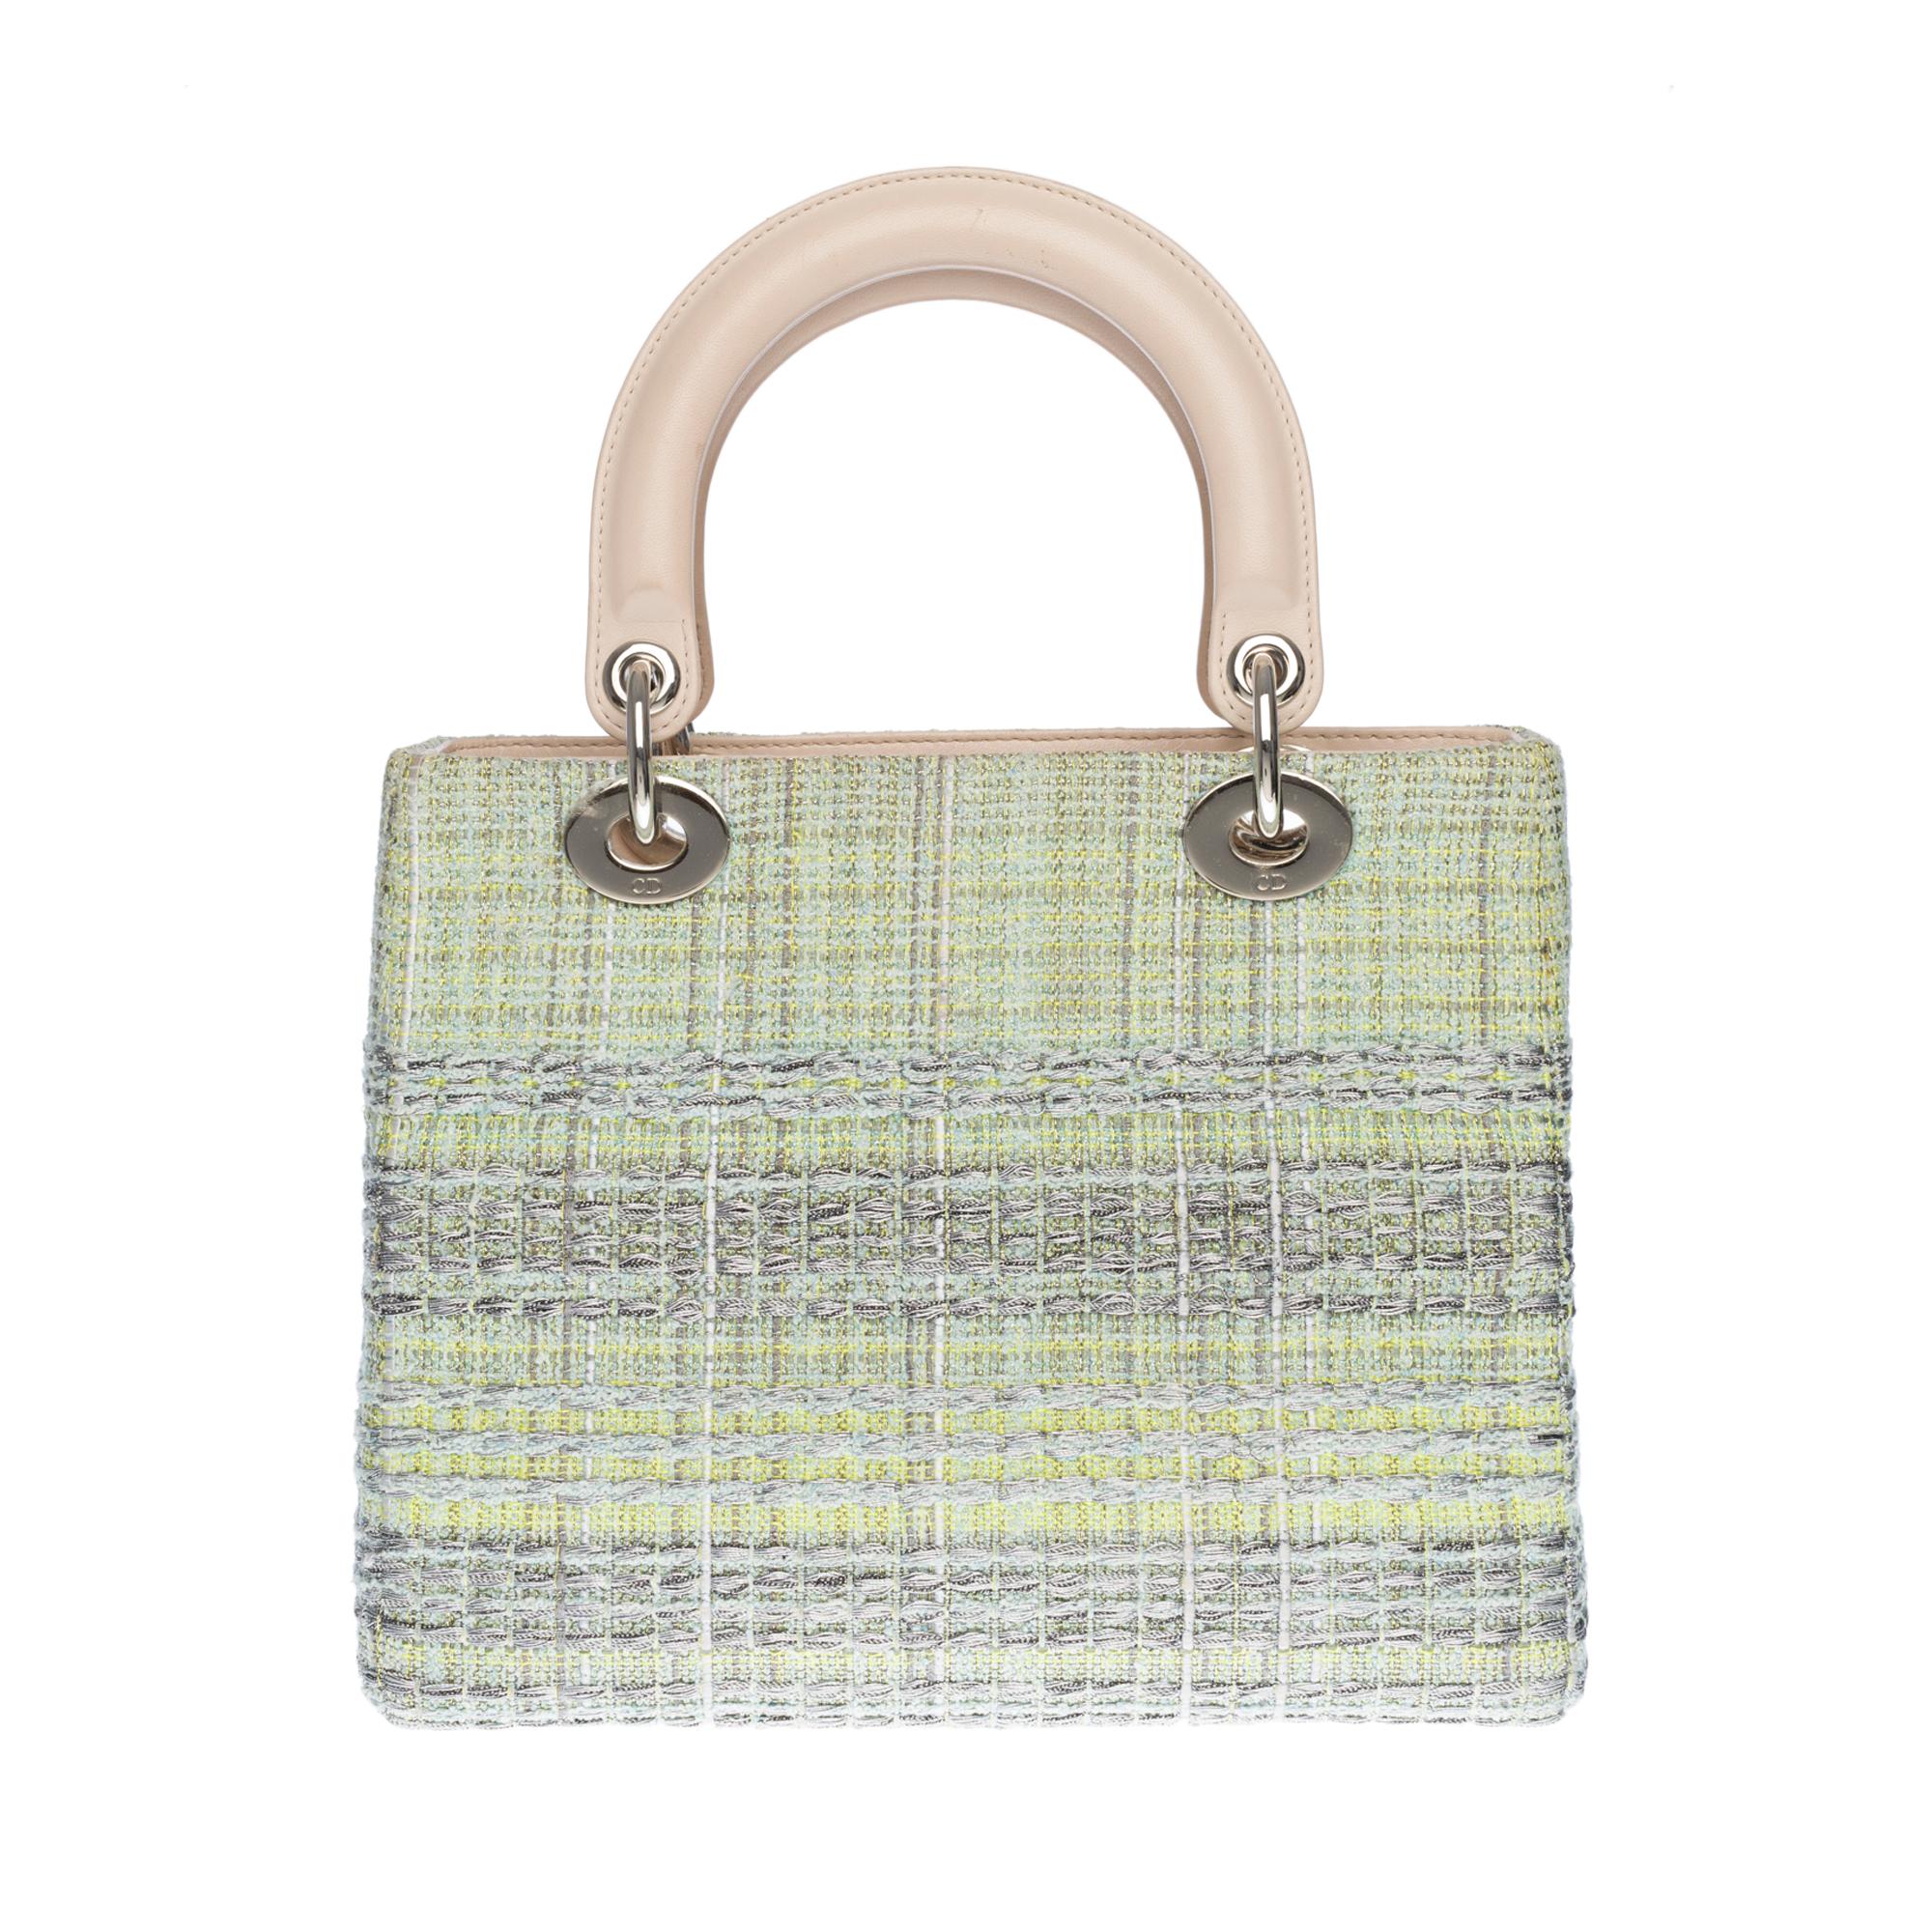 The Lady Dior bag embodies classic elegance combined with the modernity of the House of Dior. This creation is entirely embroidered with the green Tweed pattern embroidered with silver threads, featuring the Maison’s iconic motif through a play of